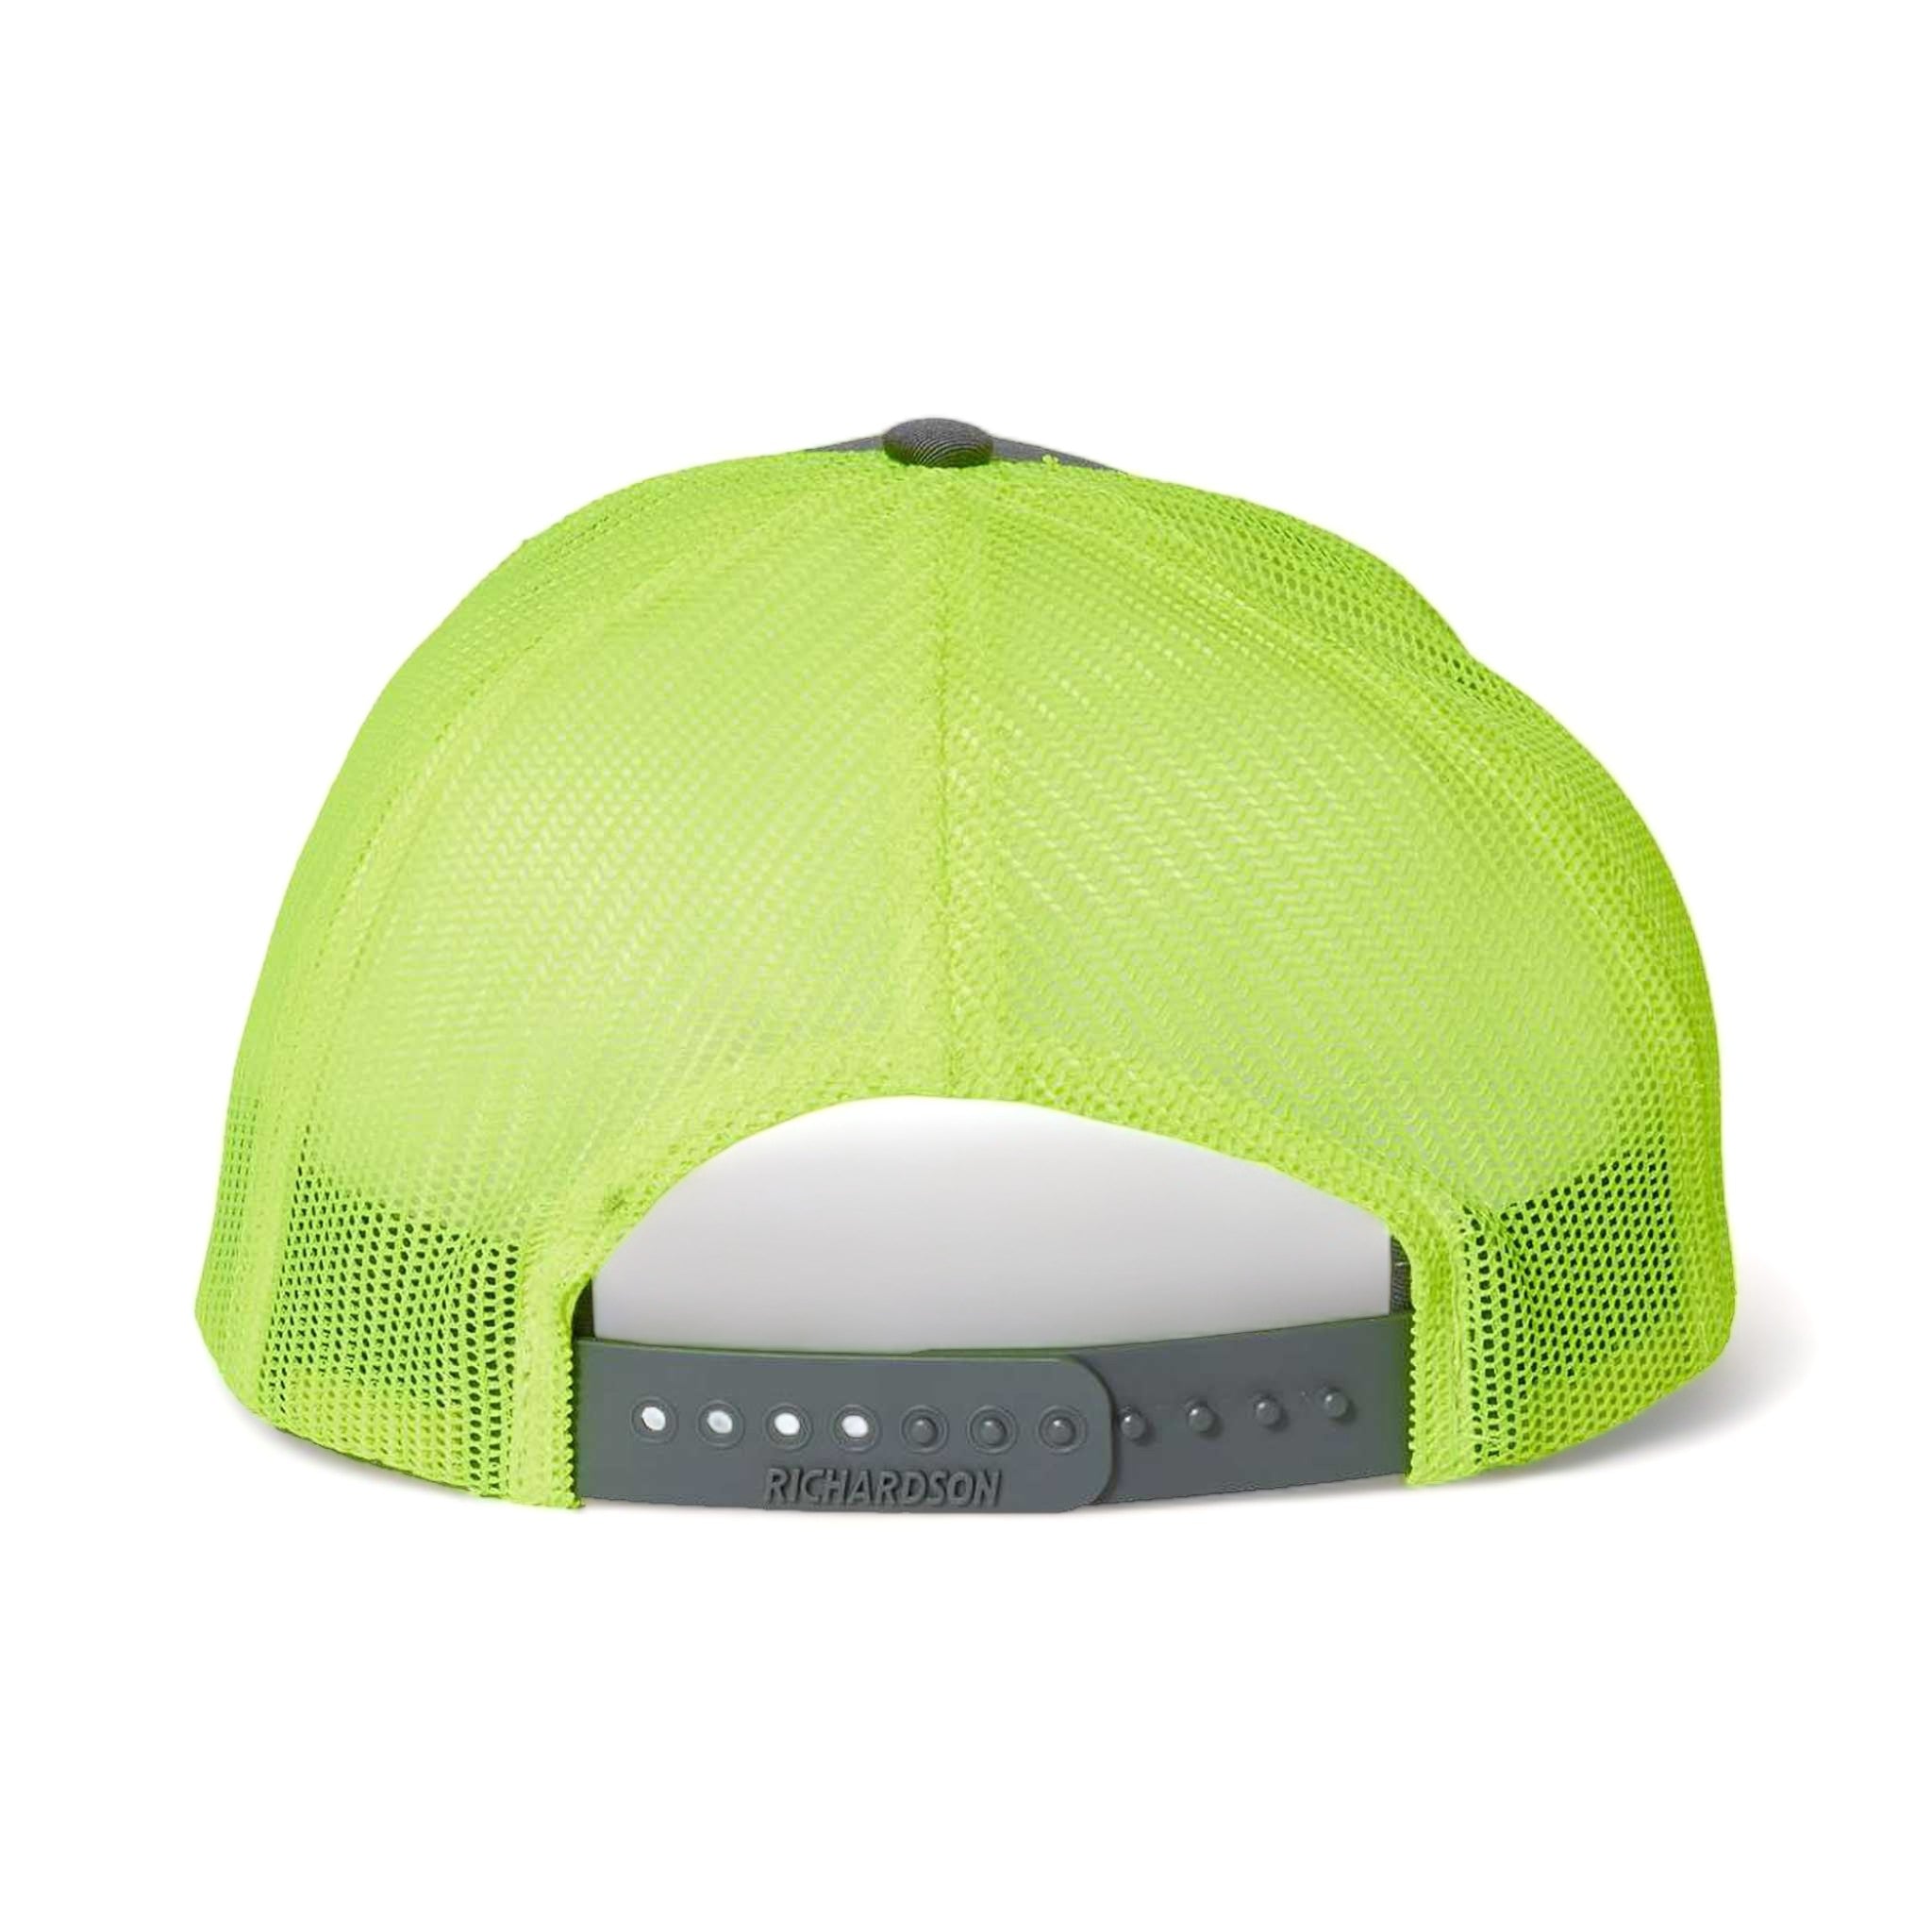 Back view of Richardson 112 custom hat in charcoal and neon yellow